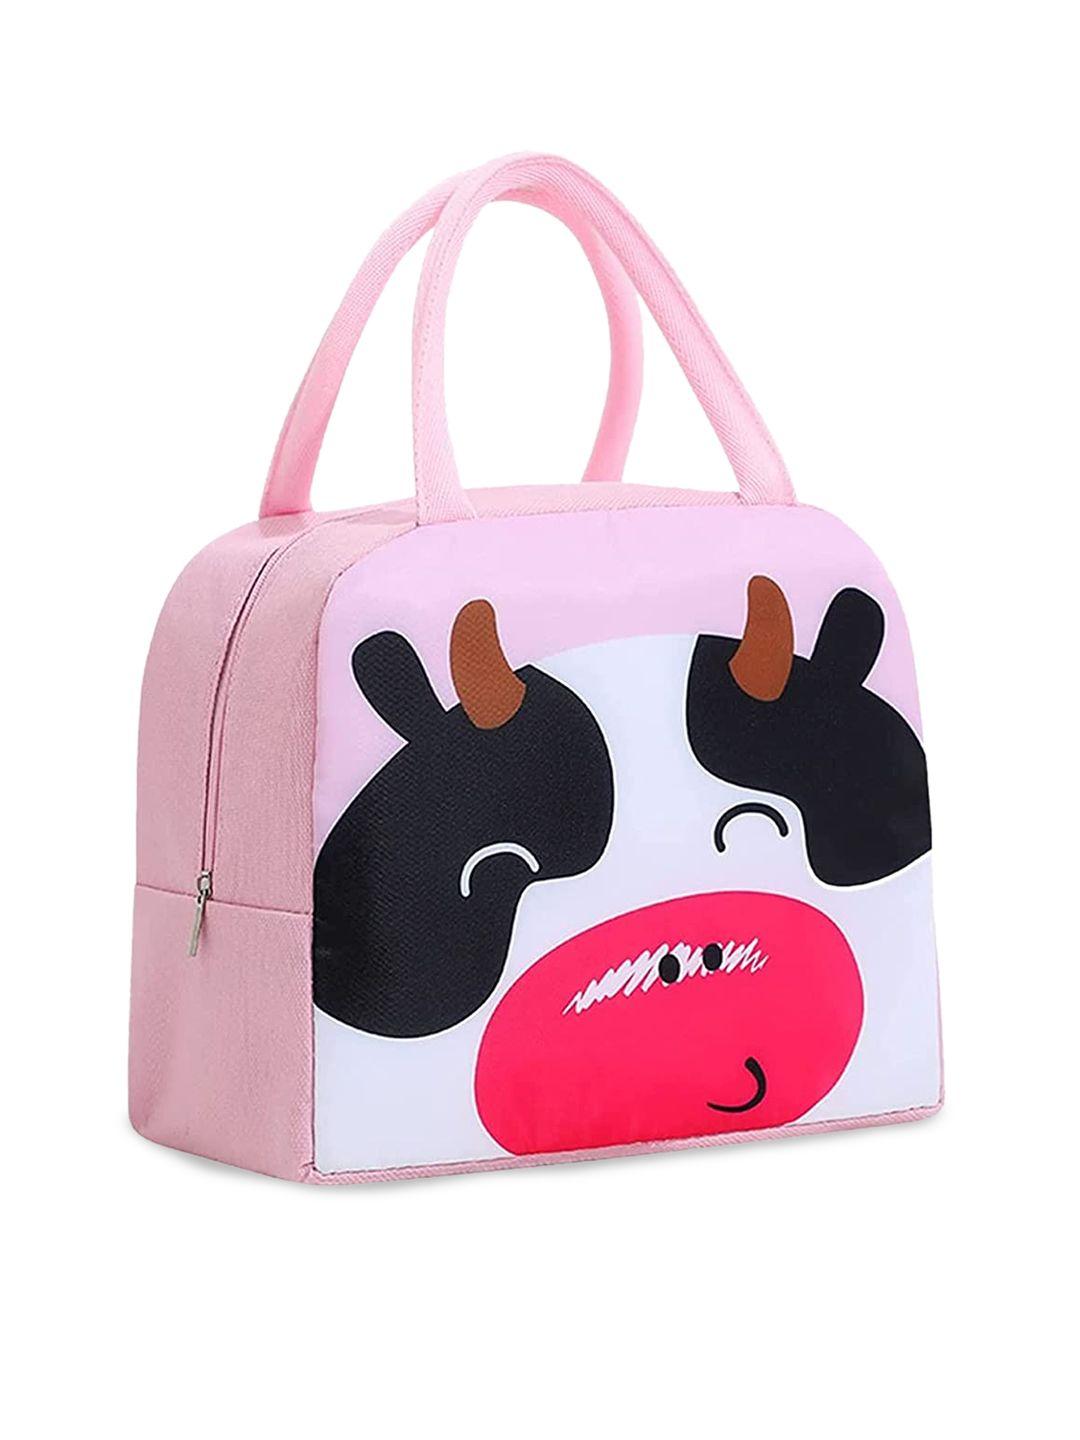 house of quirk pink printed insulated reusable lunch bag organisers